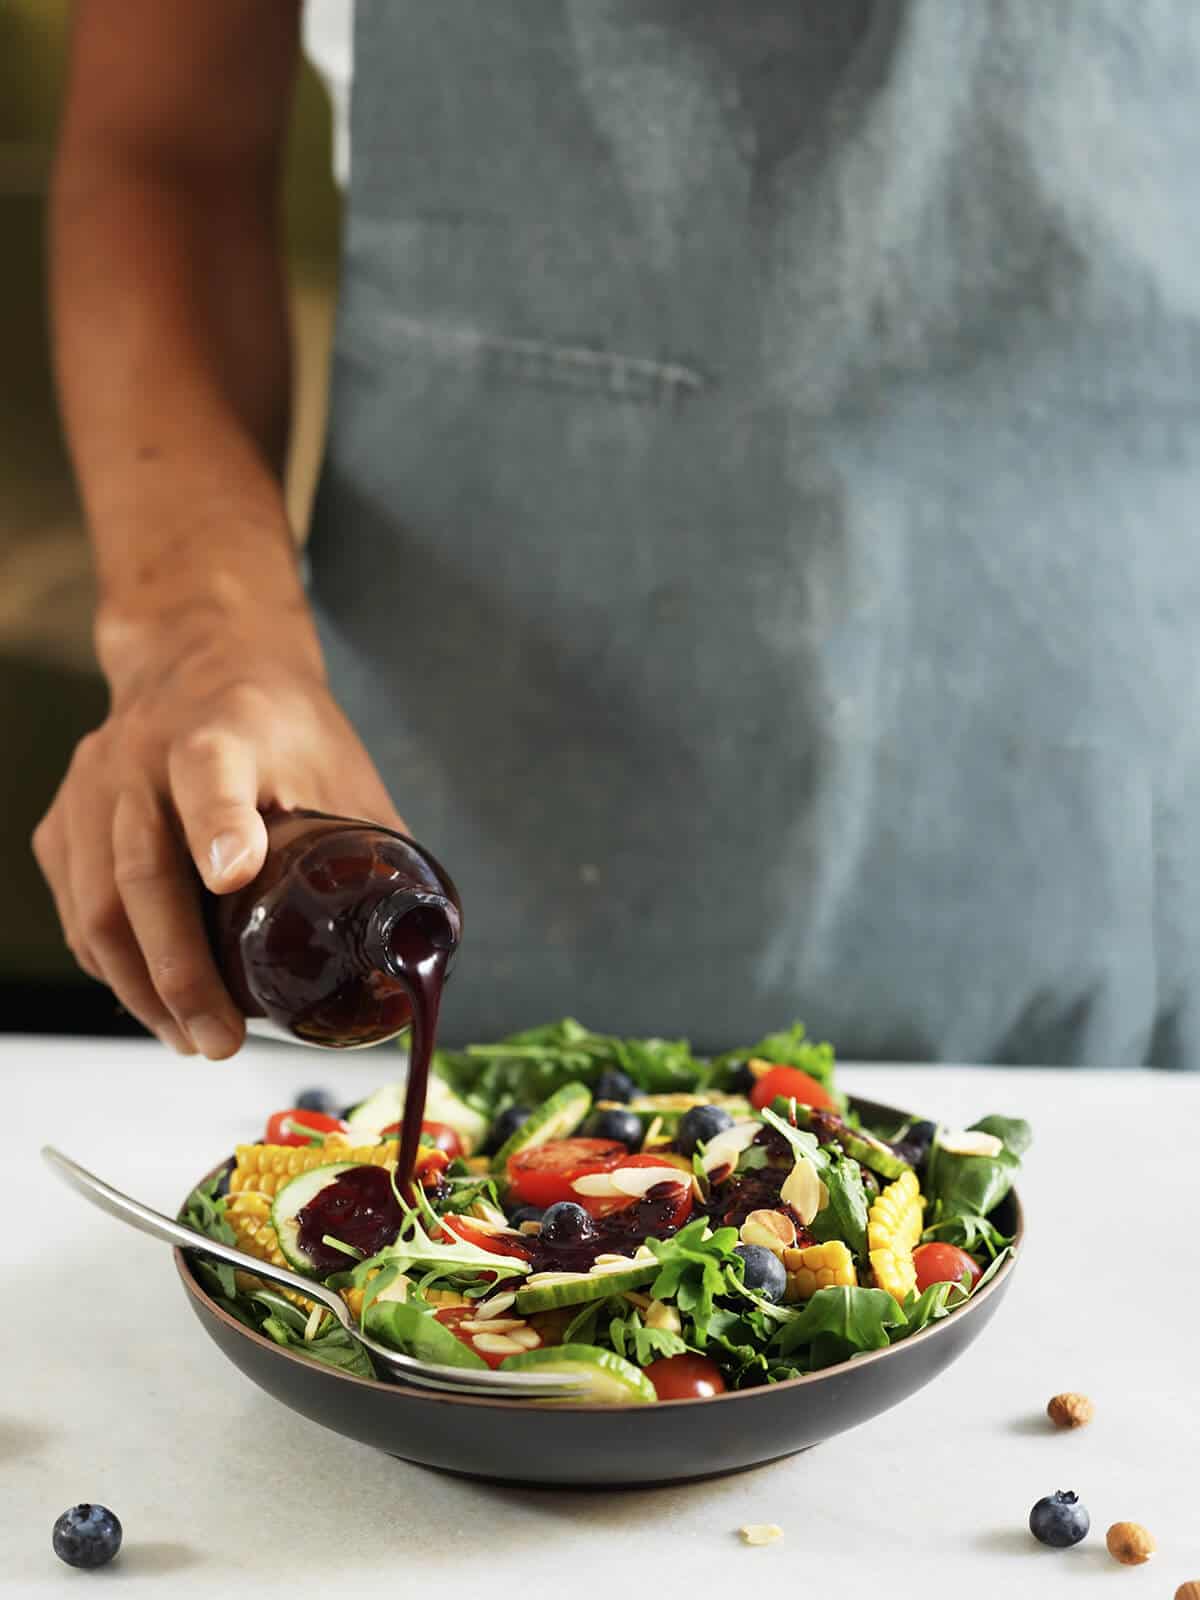 pouring blueberry dressing into spinach arugula salad.